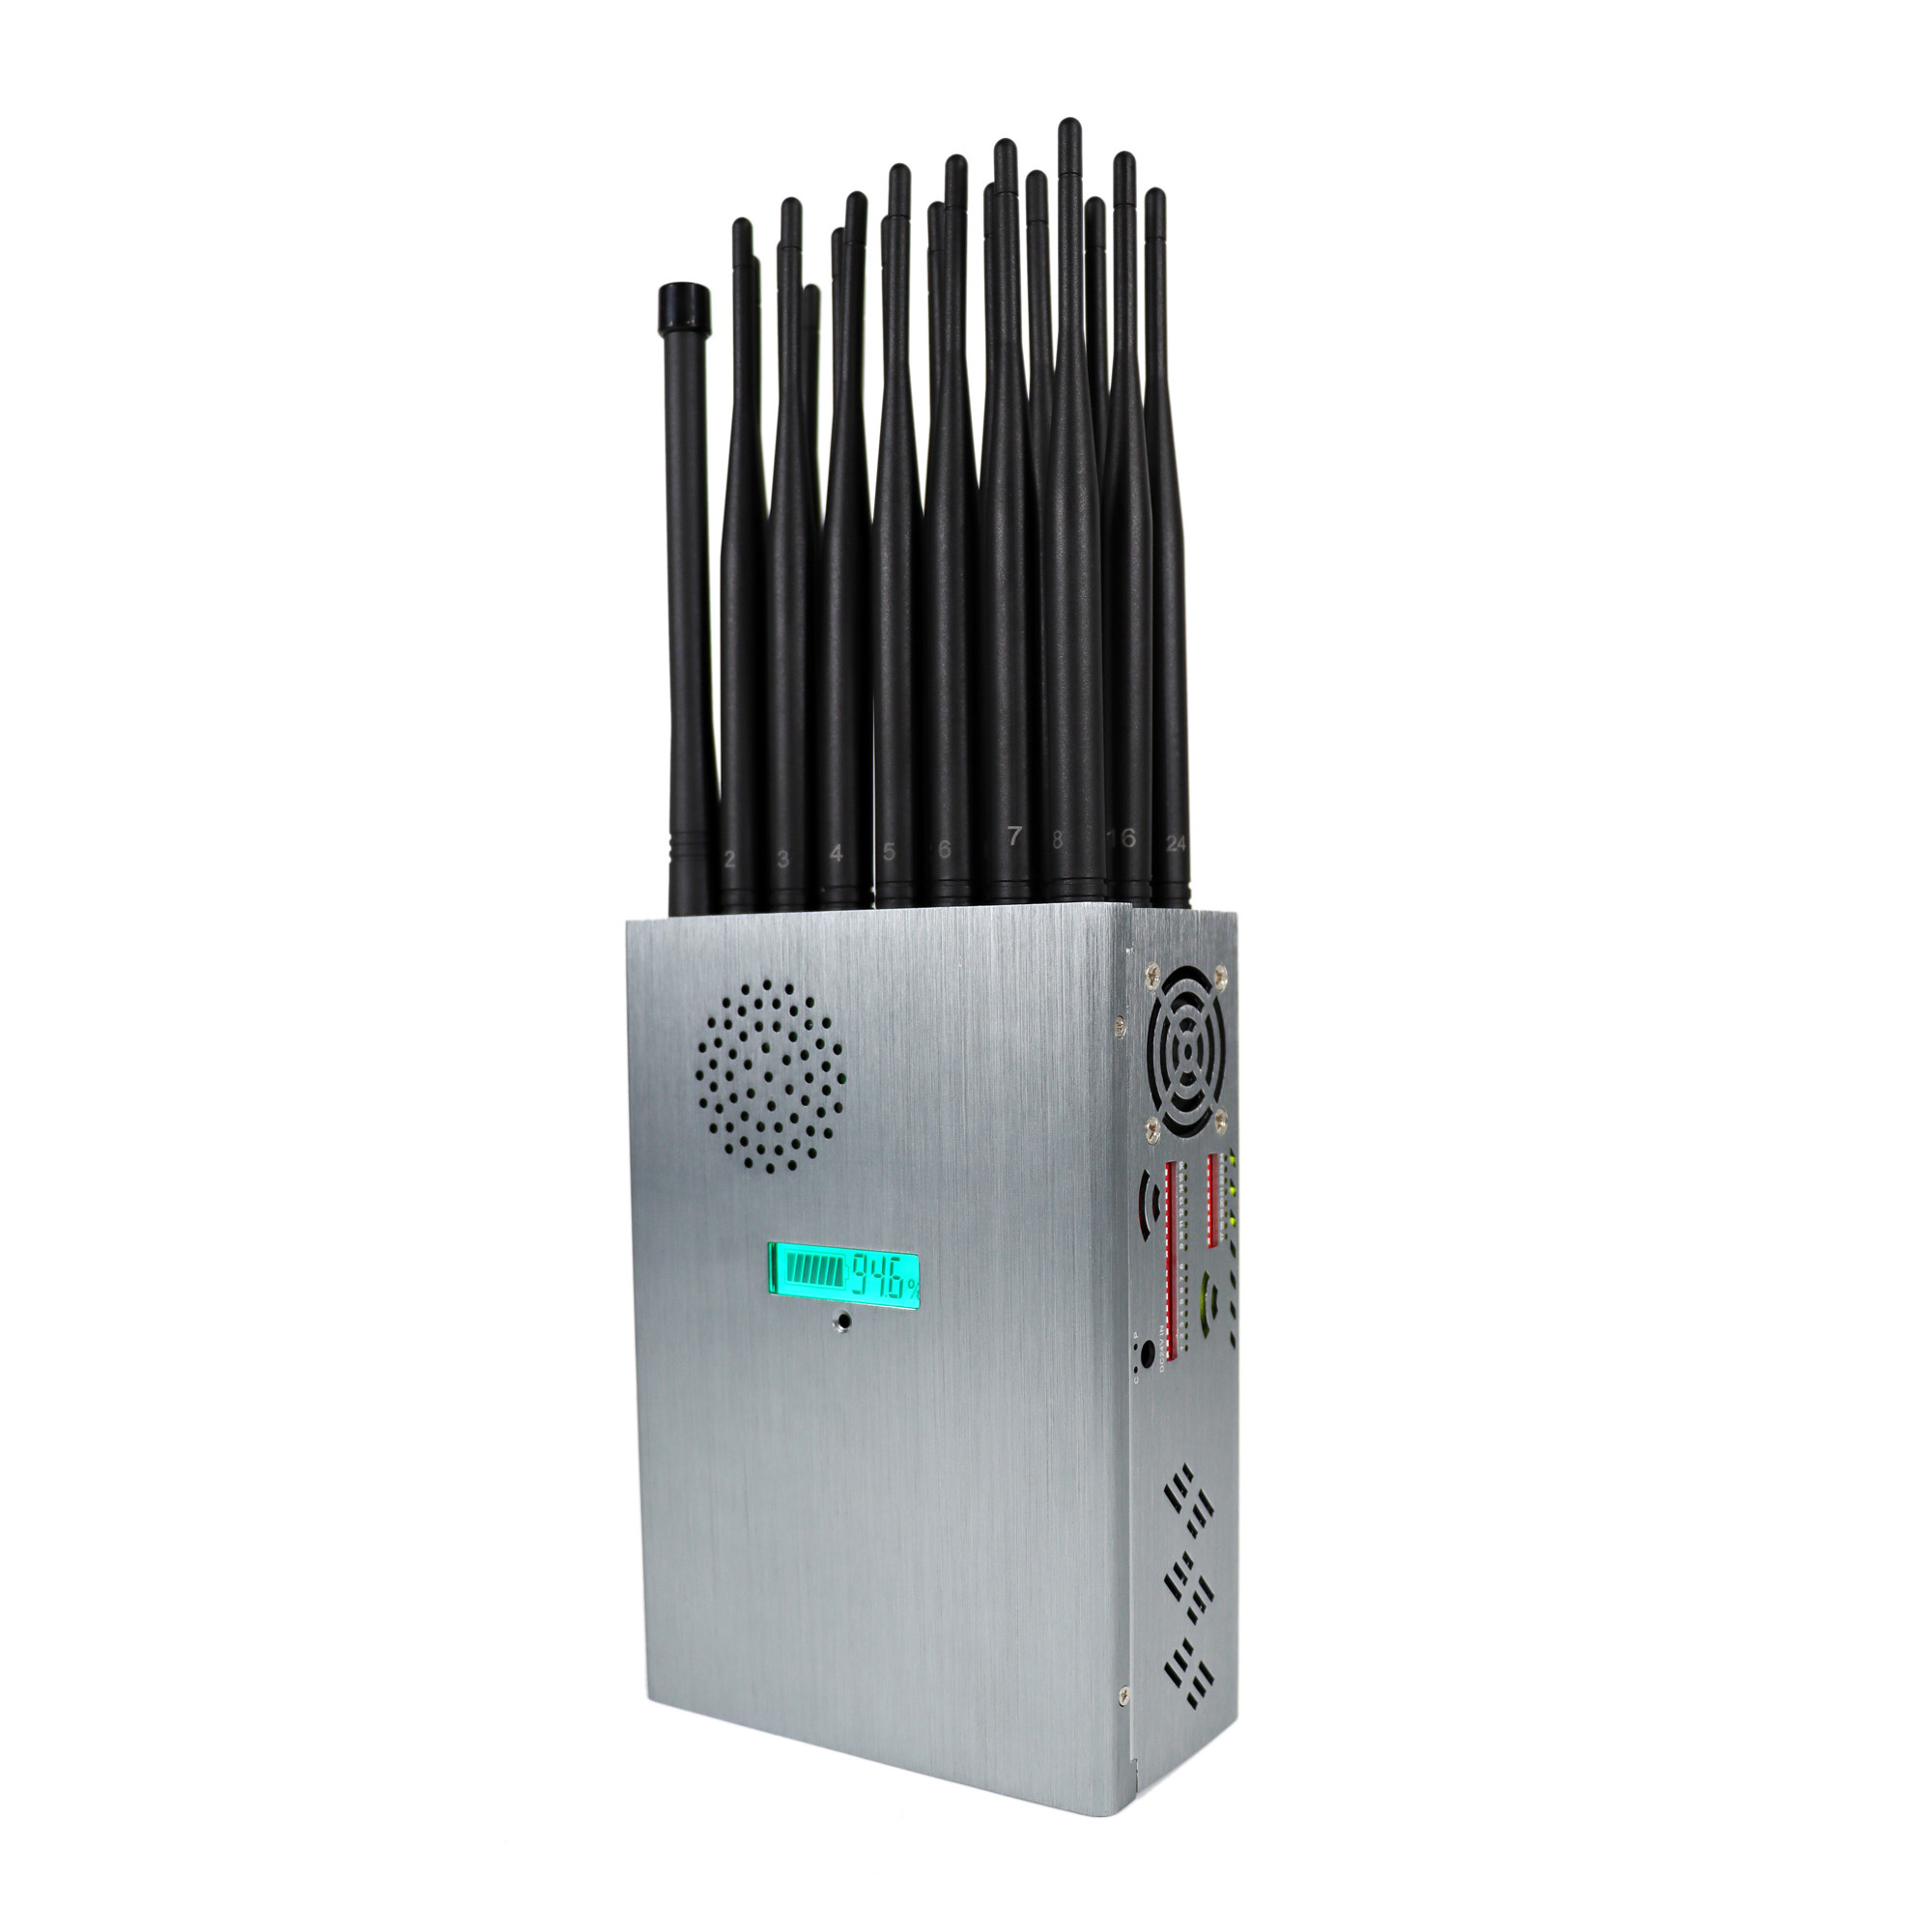 Portable Multifunction frequency Jammer